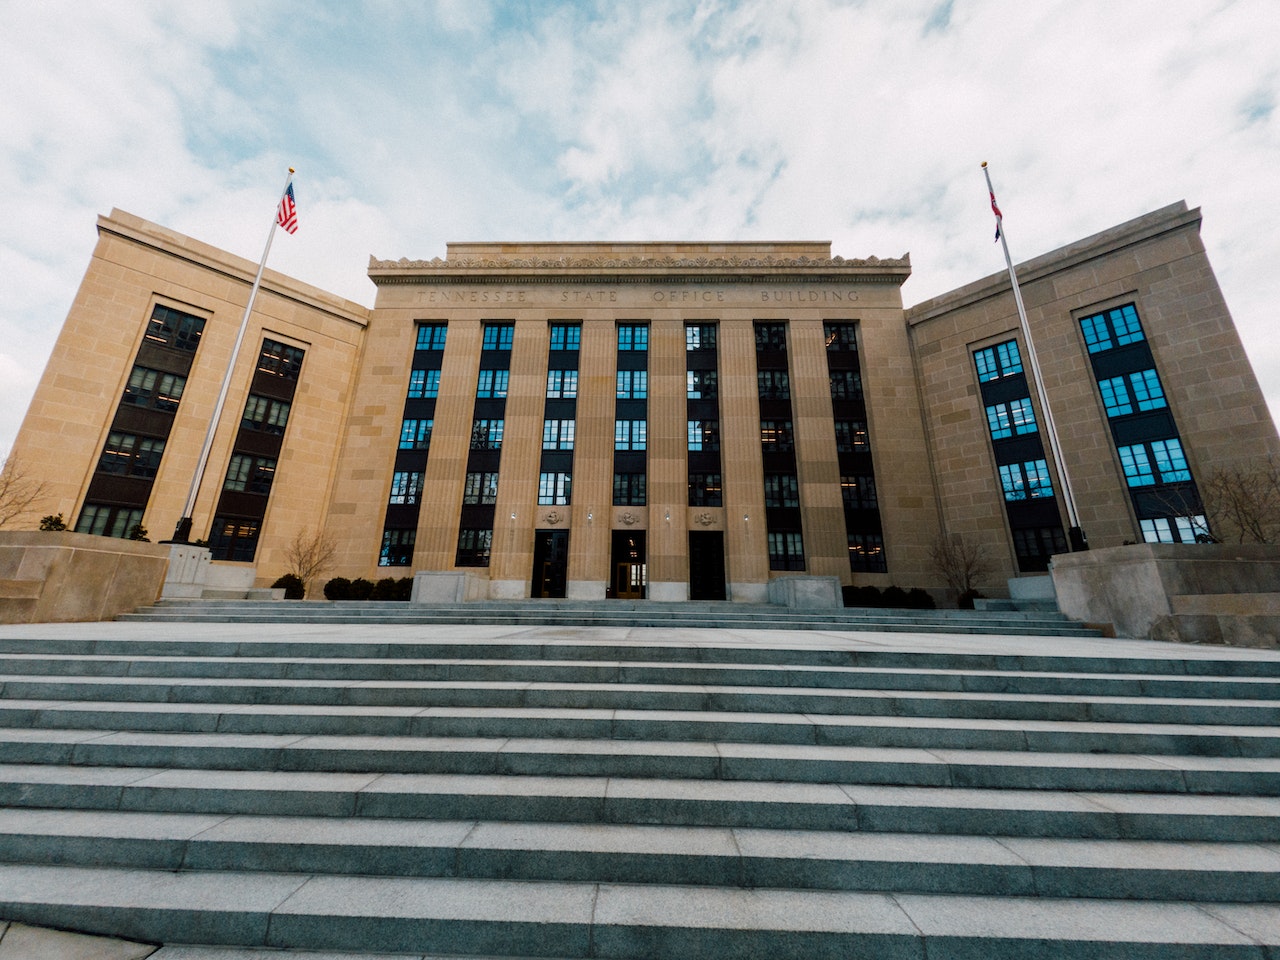 Façade of the U.S. Federal Reserve System and a flagpole on each side, with the American flag on the left side